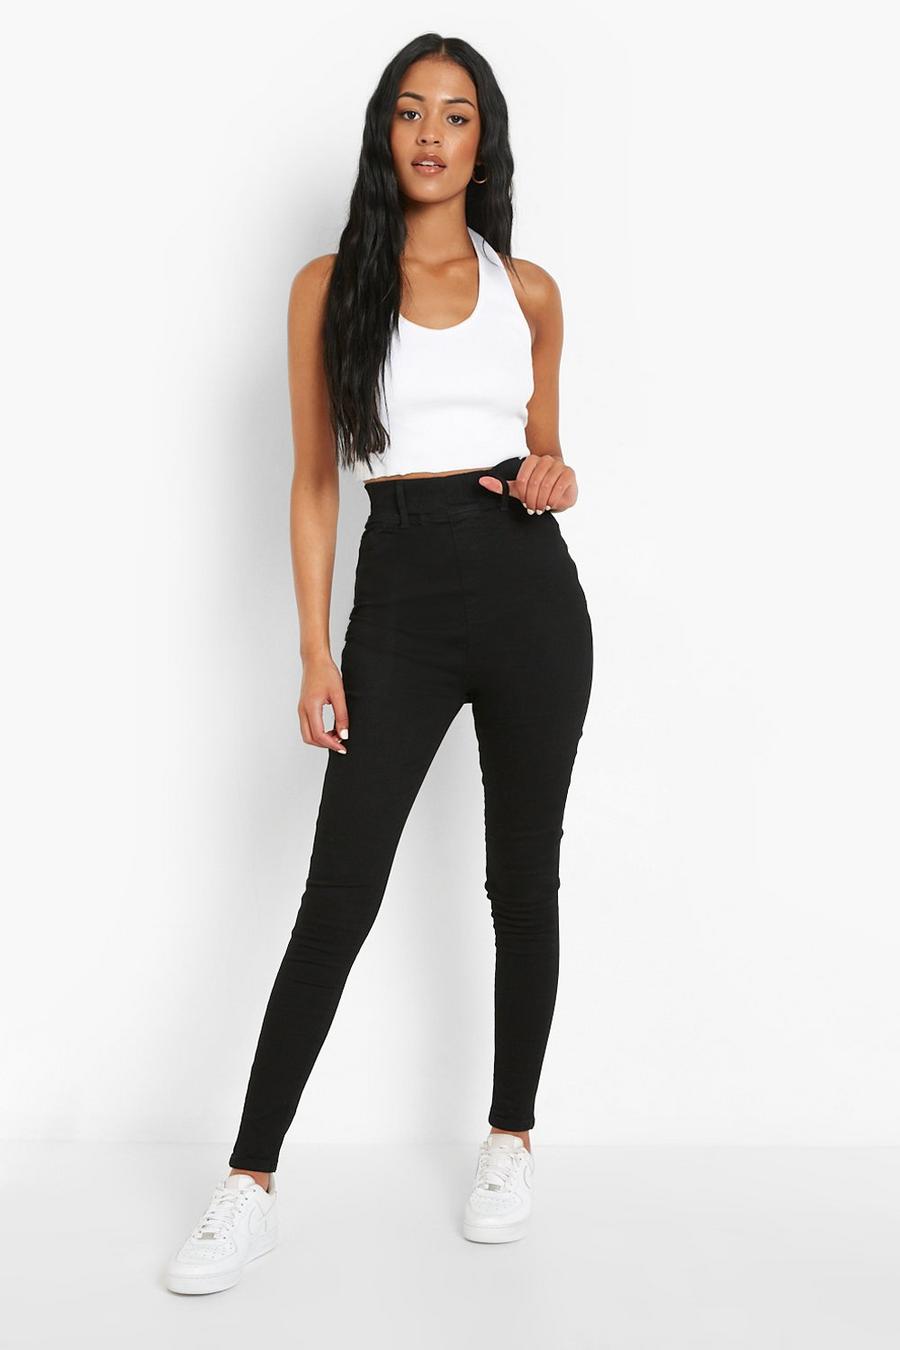 Black Tall Ruched Bum Booty Boost Denim Jegging